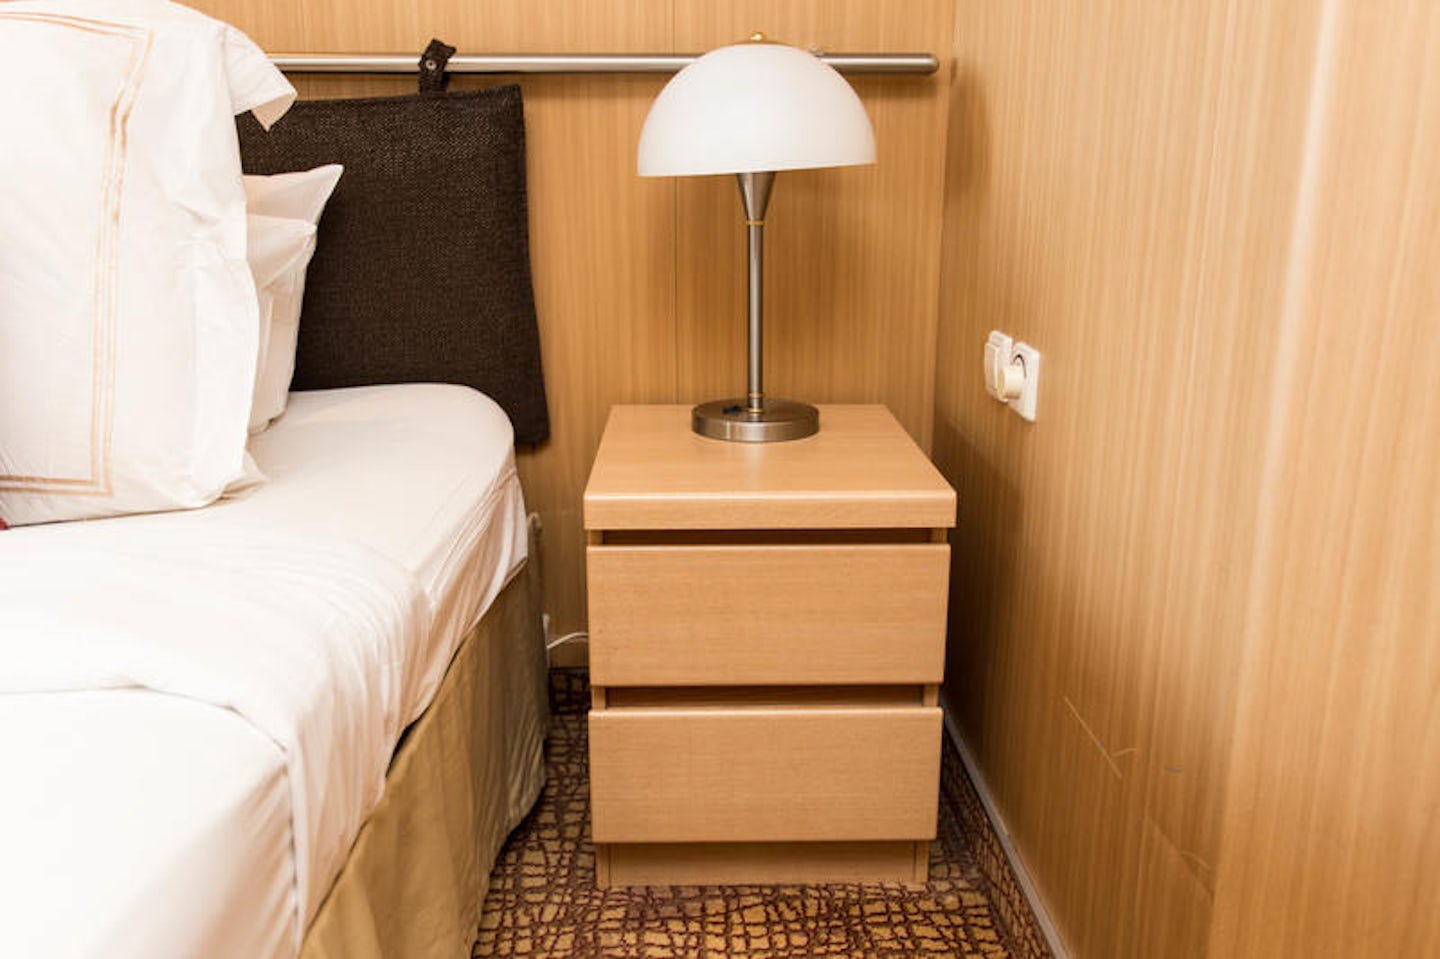 The Concierge Class Cabin on Celebrity Infinity